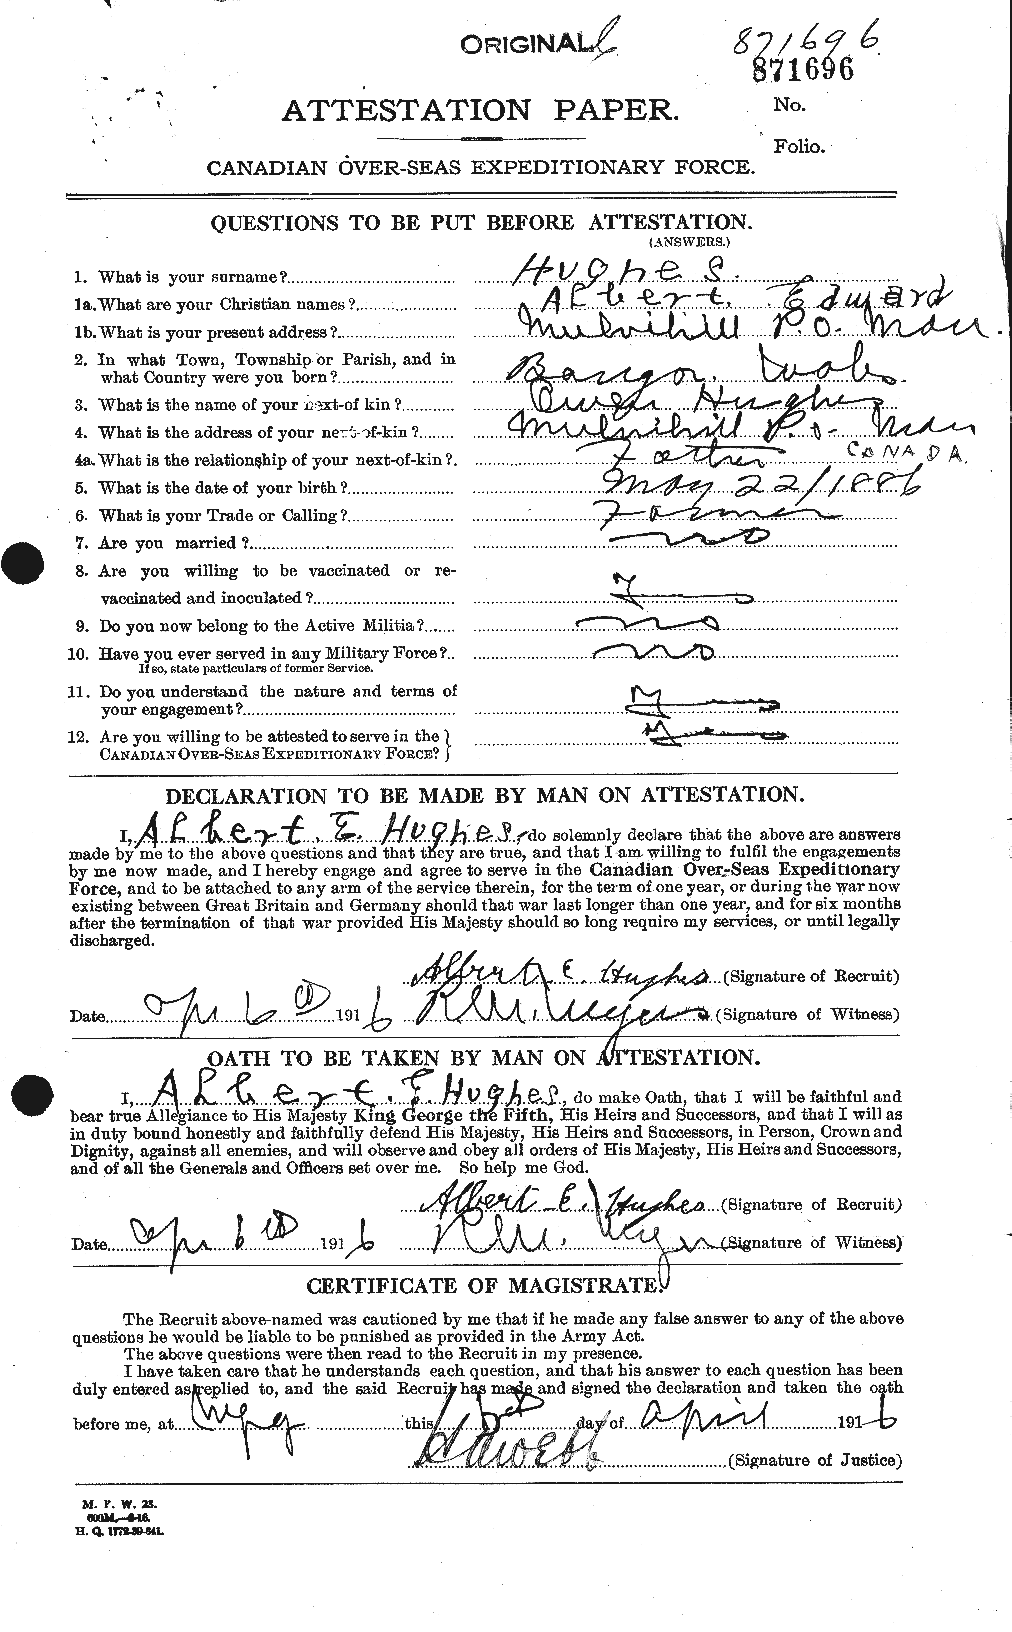 Personnel Records of the First World War - CEF 402520a